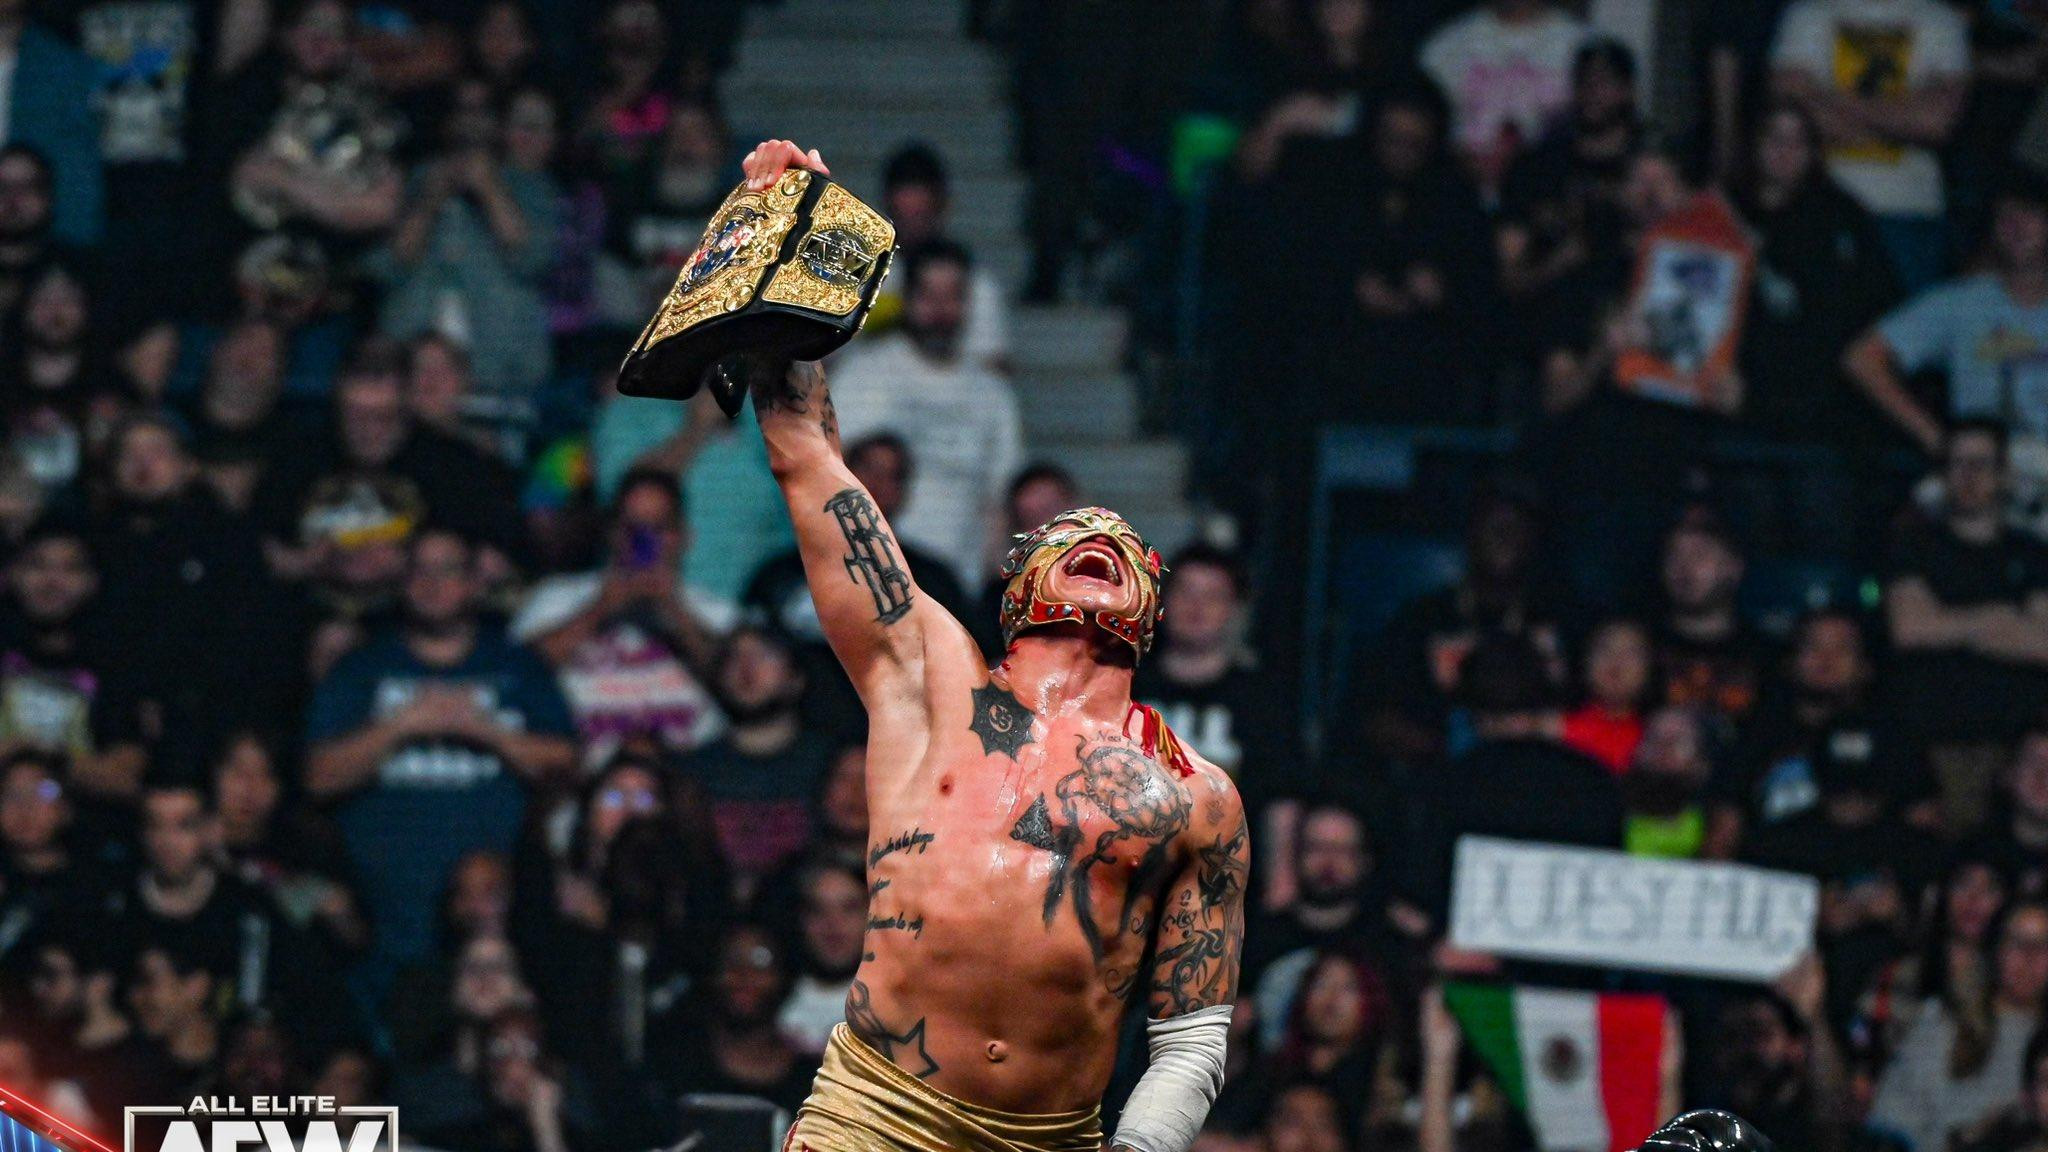 Rey Fenix Says An Old Injury Has Been Bothering Him Again Since AEW Dynamite: Grand Slam